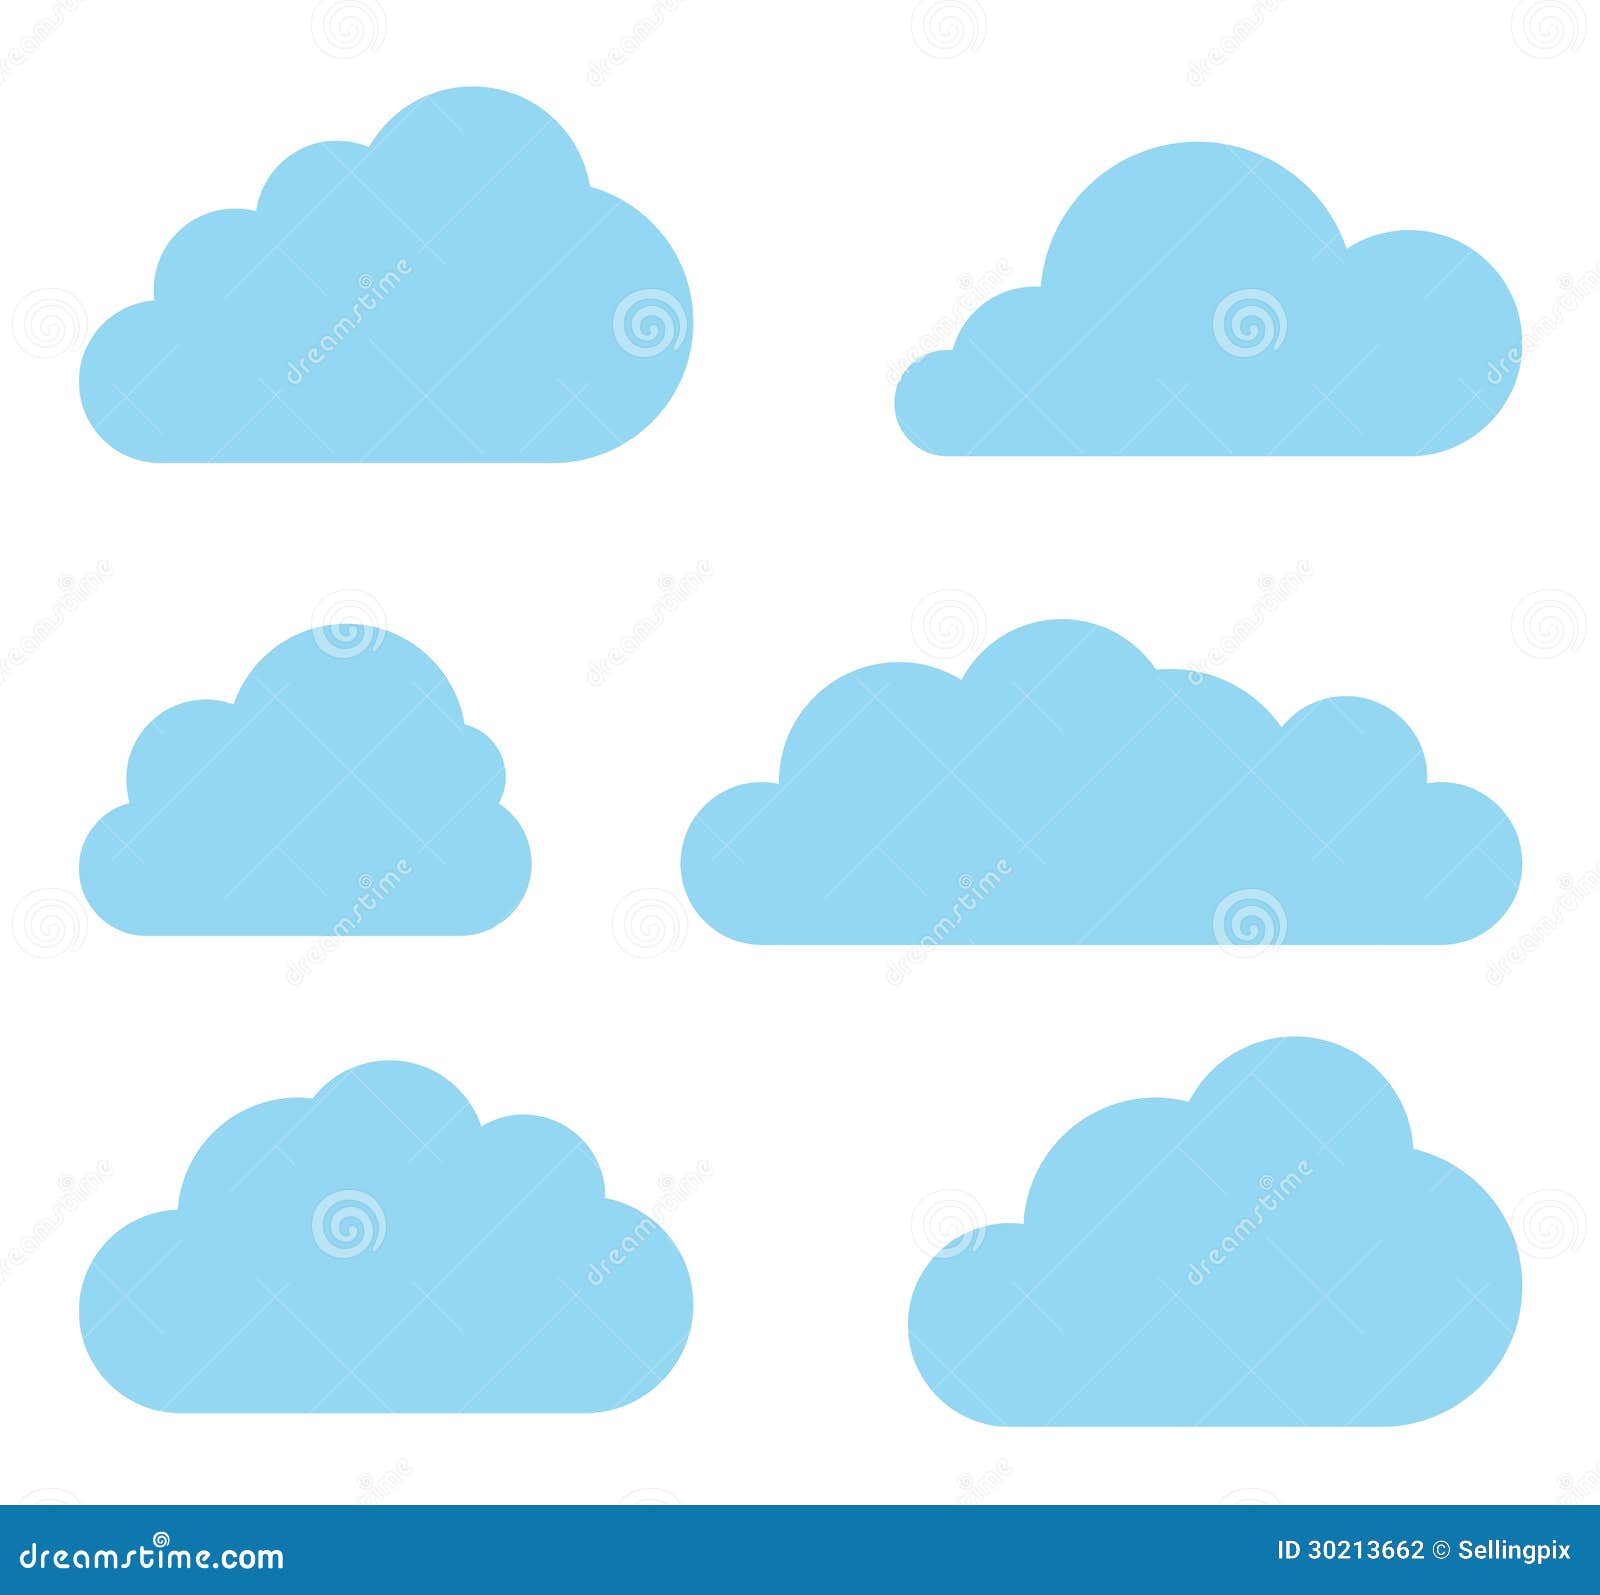 clouds  collection. cloud computing pack.